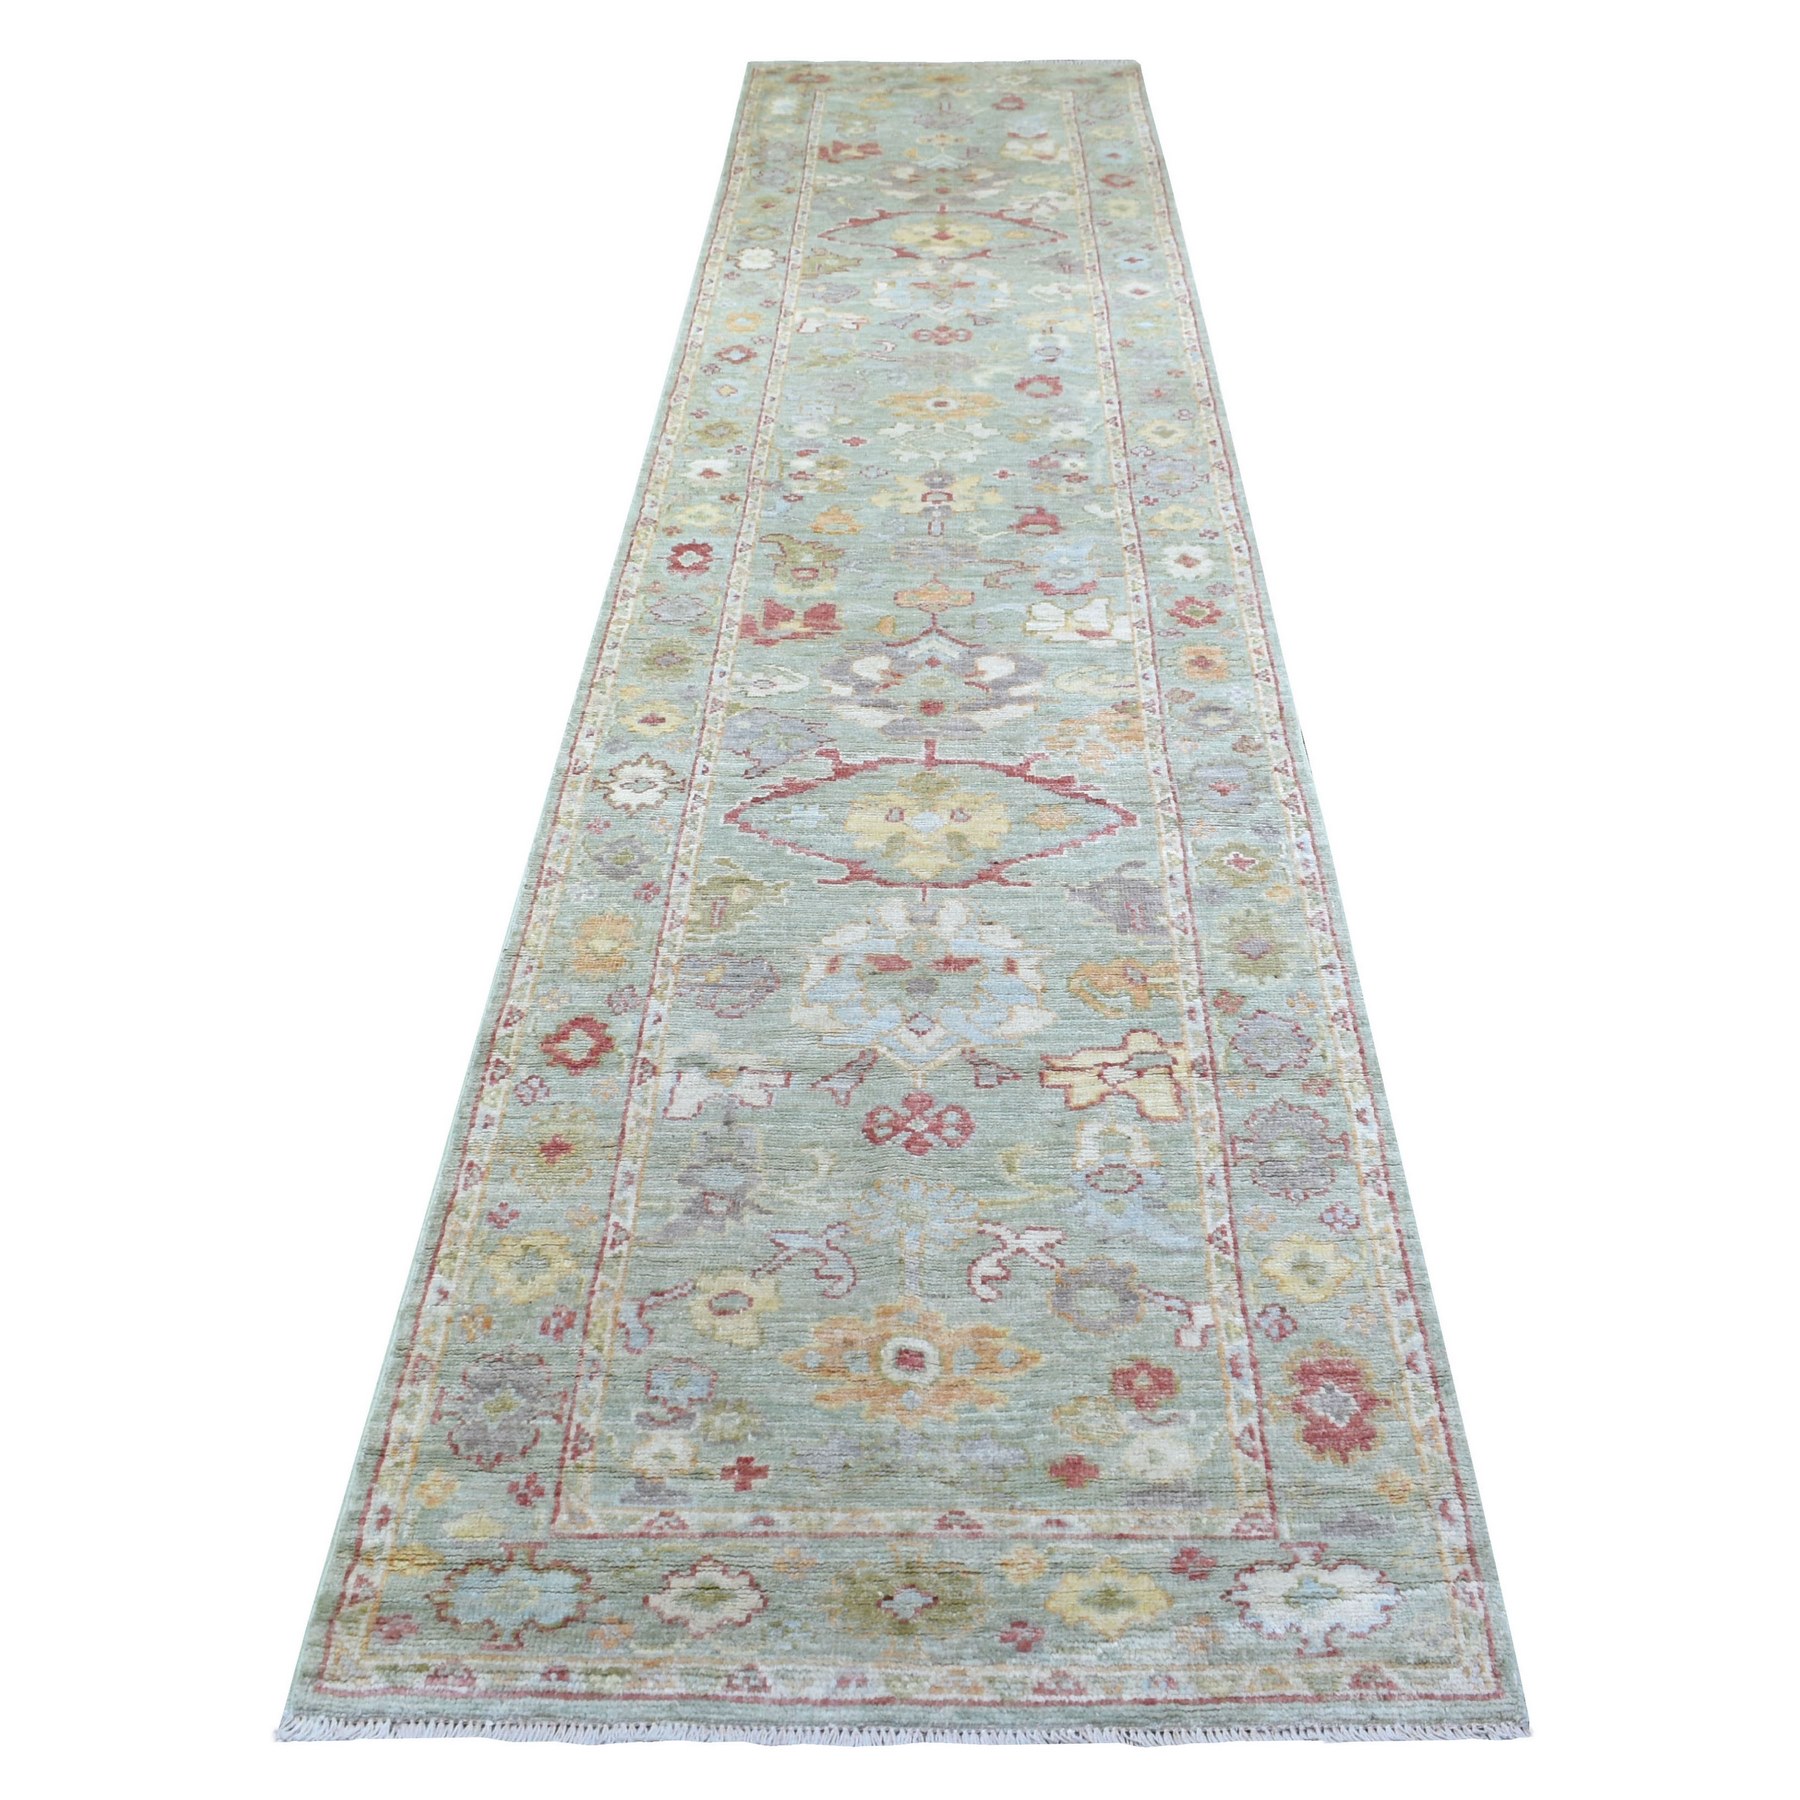 3'x13'3" Green Angora Oushak with All Over Design Hand Woven Soft, Afghan Wool Oriental Wide Runner Rug 